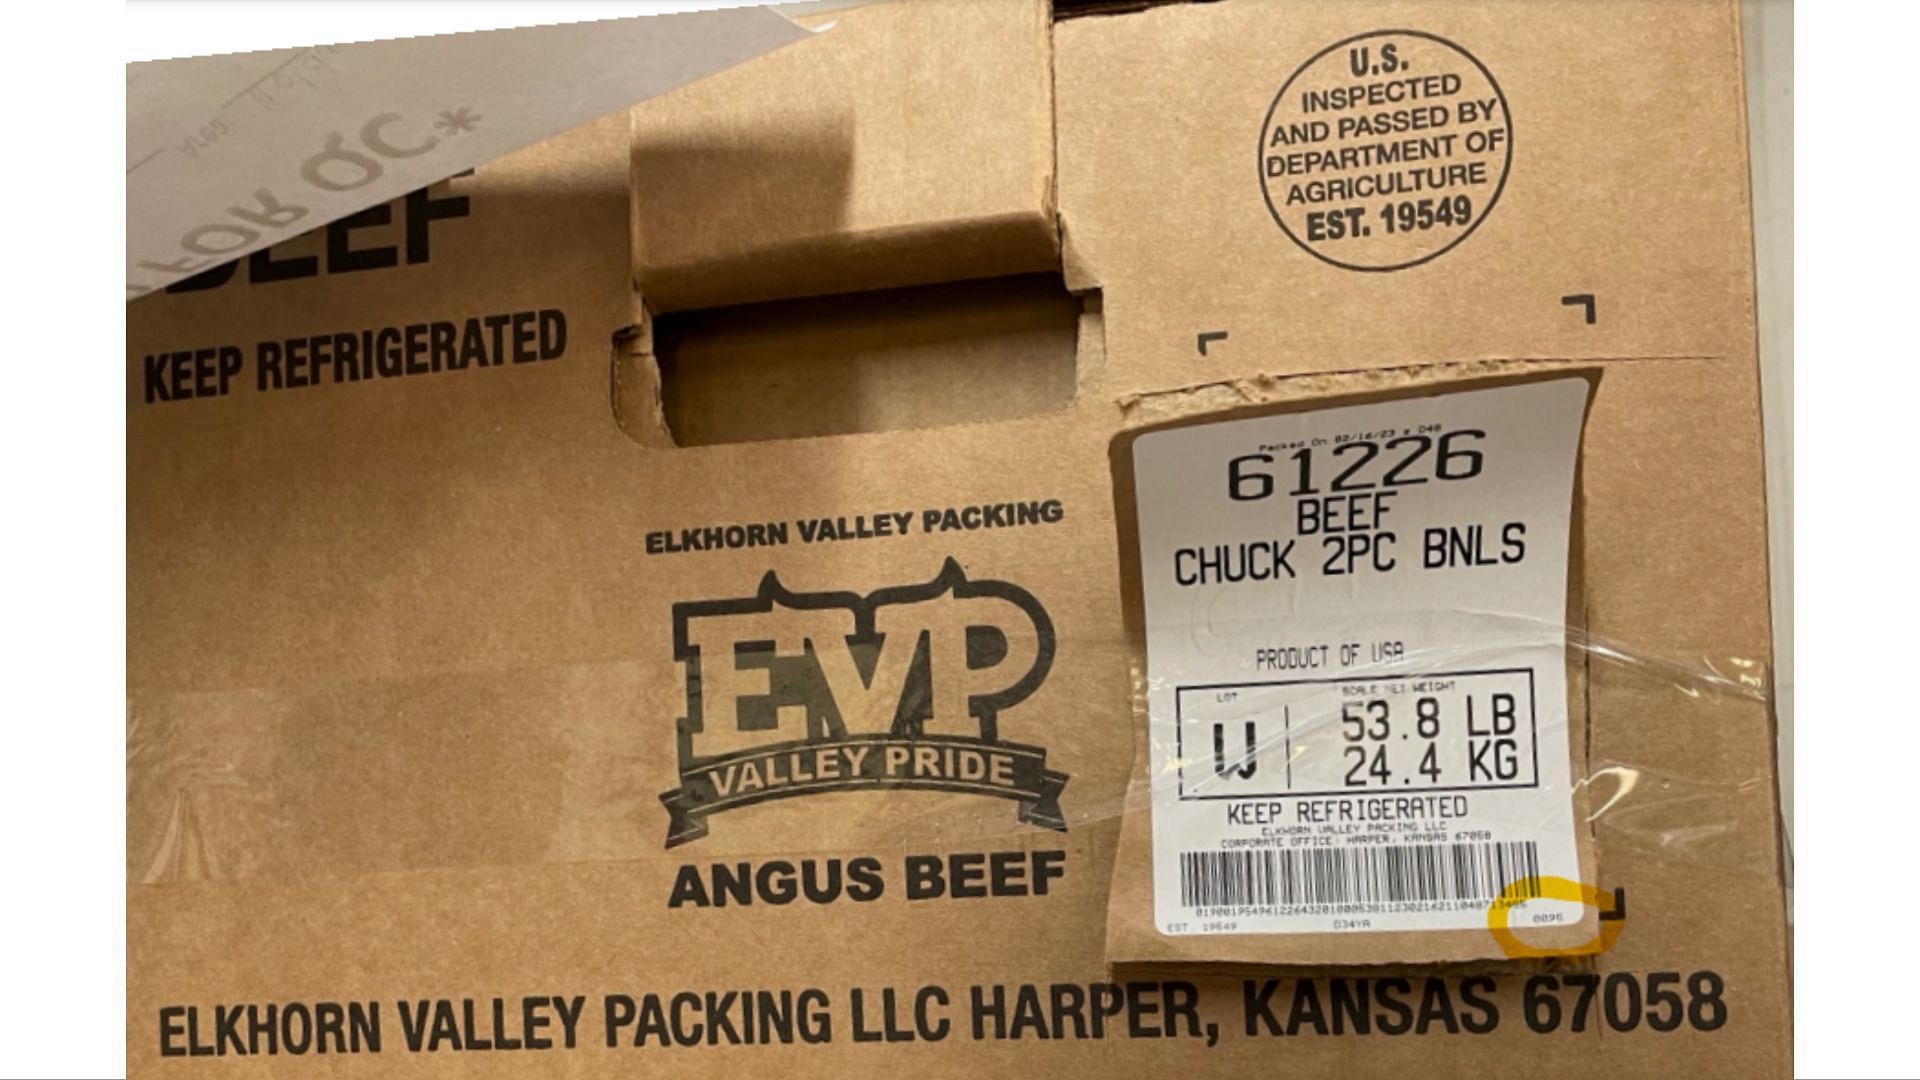 The recalled Elkhorn Valley Packing Boneless Beef Chuck products were distributed to major hotels, restaurants, and institutions across the country (Image via FSIS/Elkhorn Valley Packing)